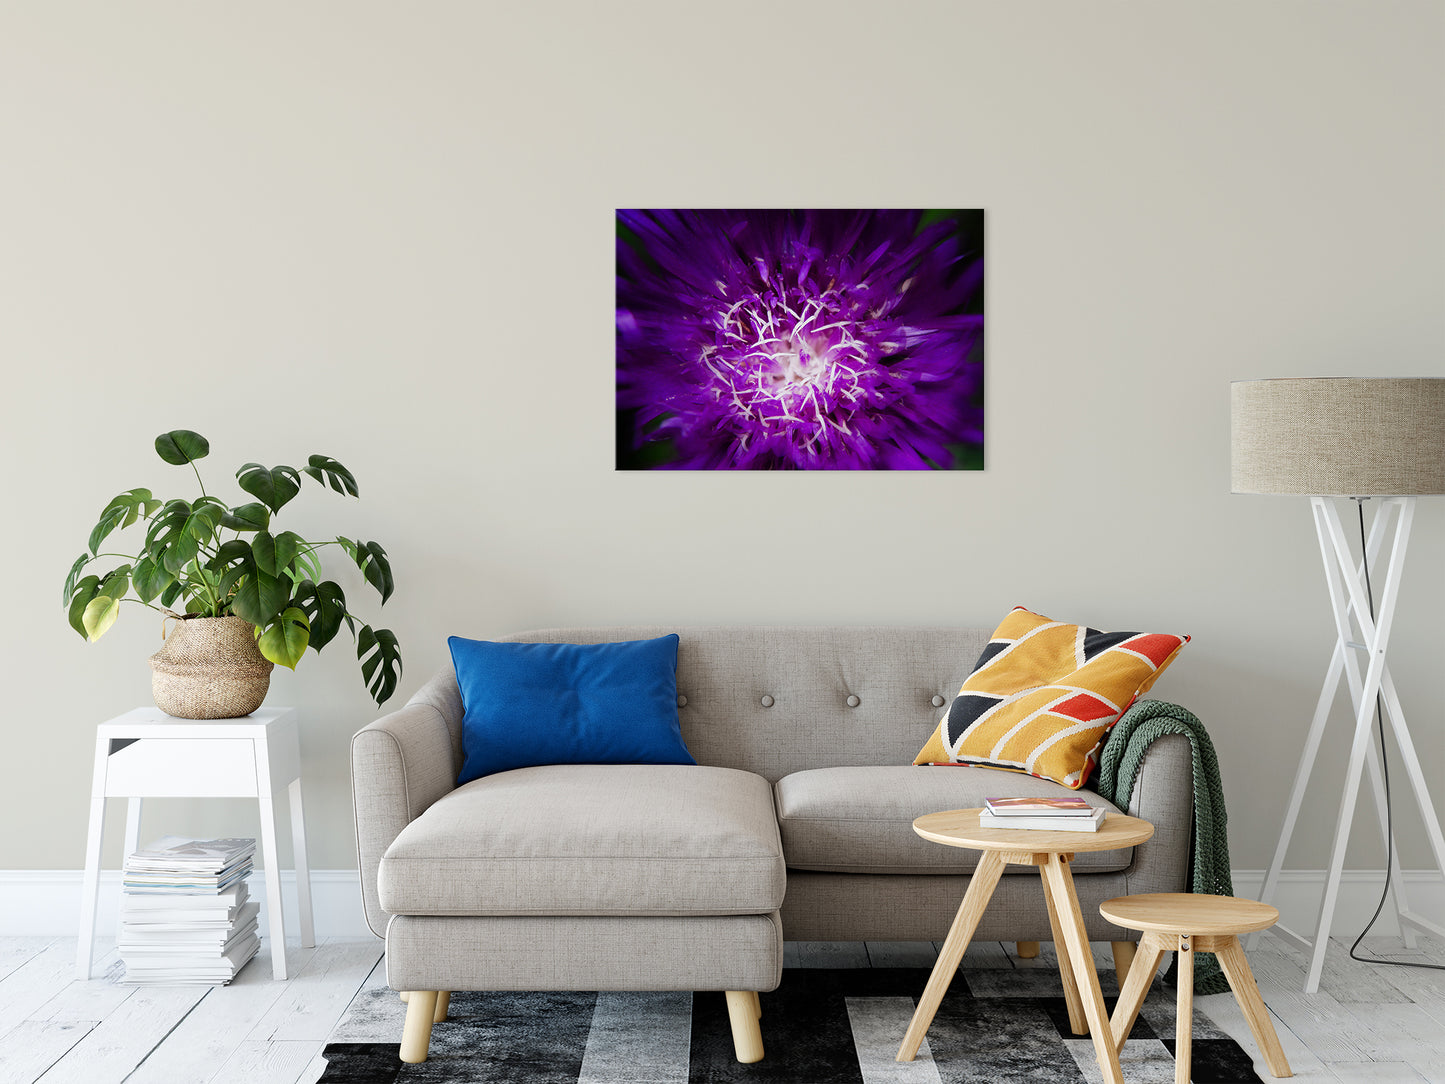 Home Decor Flower Wall Hanging: Abstract Flower Nature / Floral Photo Fine Art Canvas Wall Art Prints 24" x 36" - PIPAFINEART